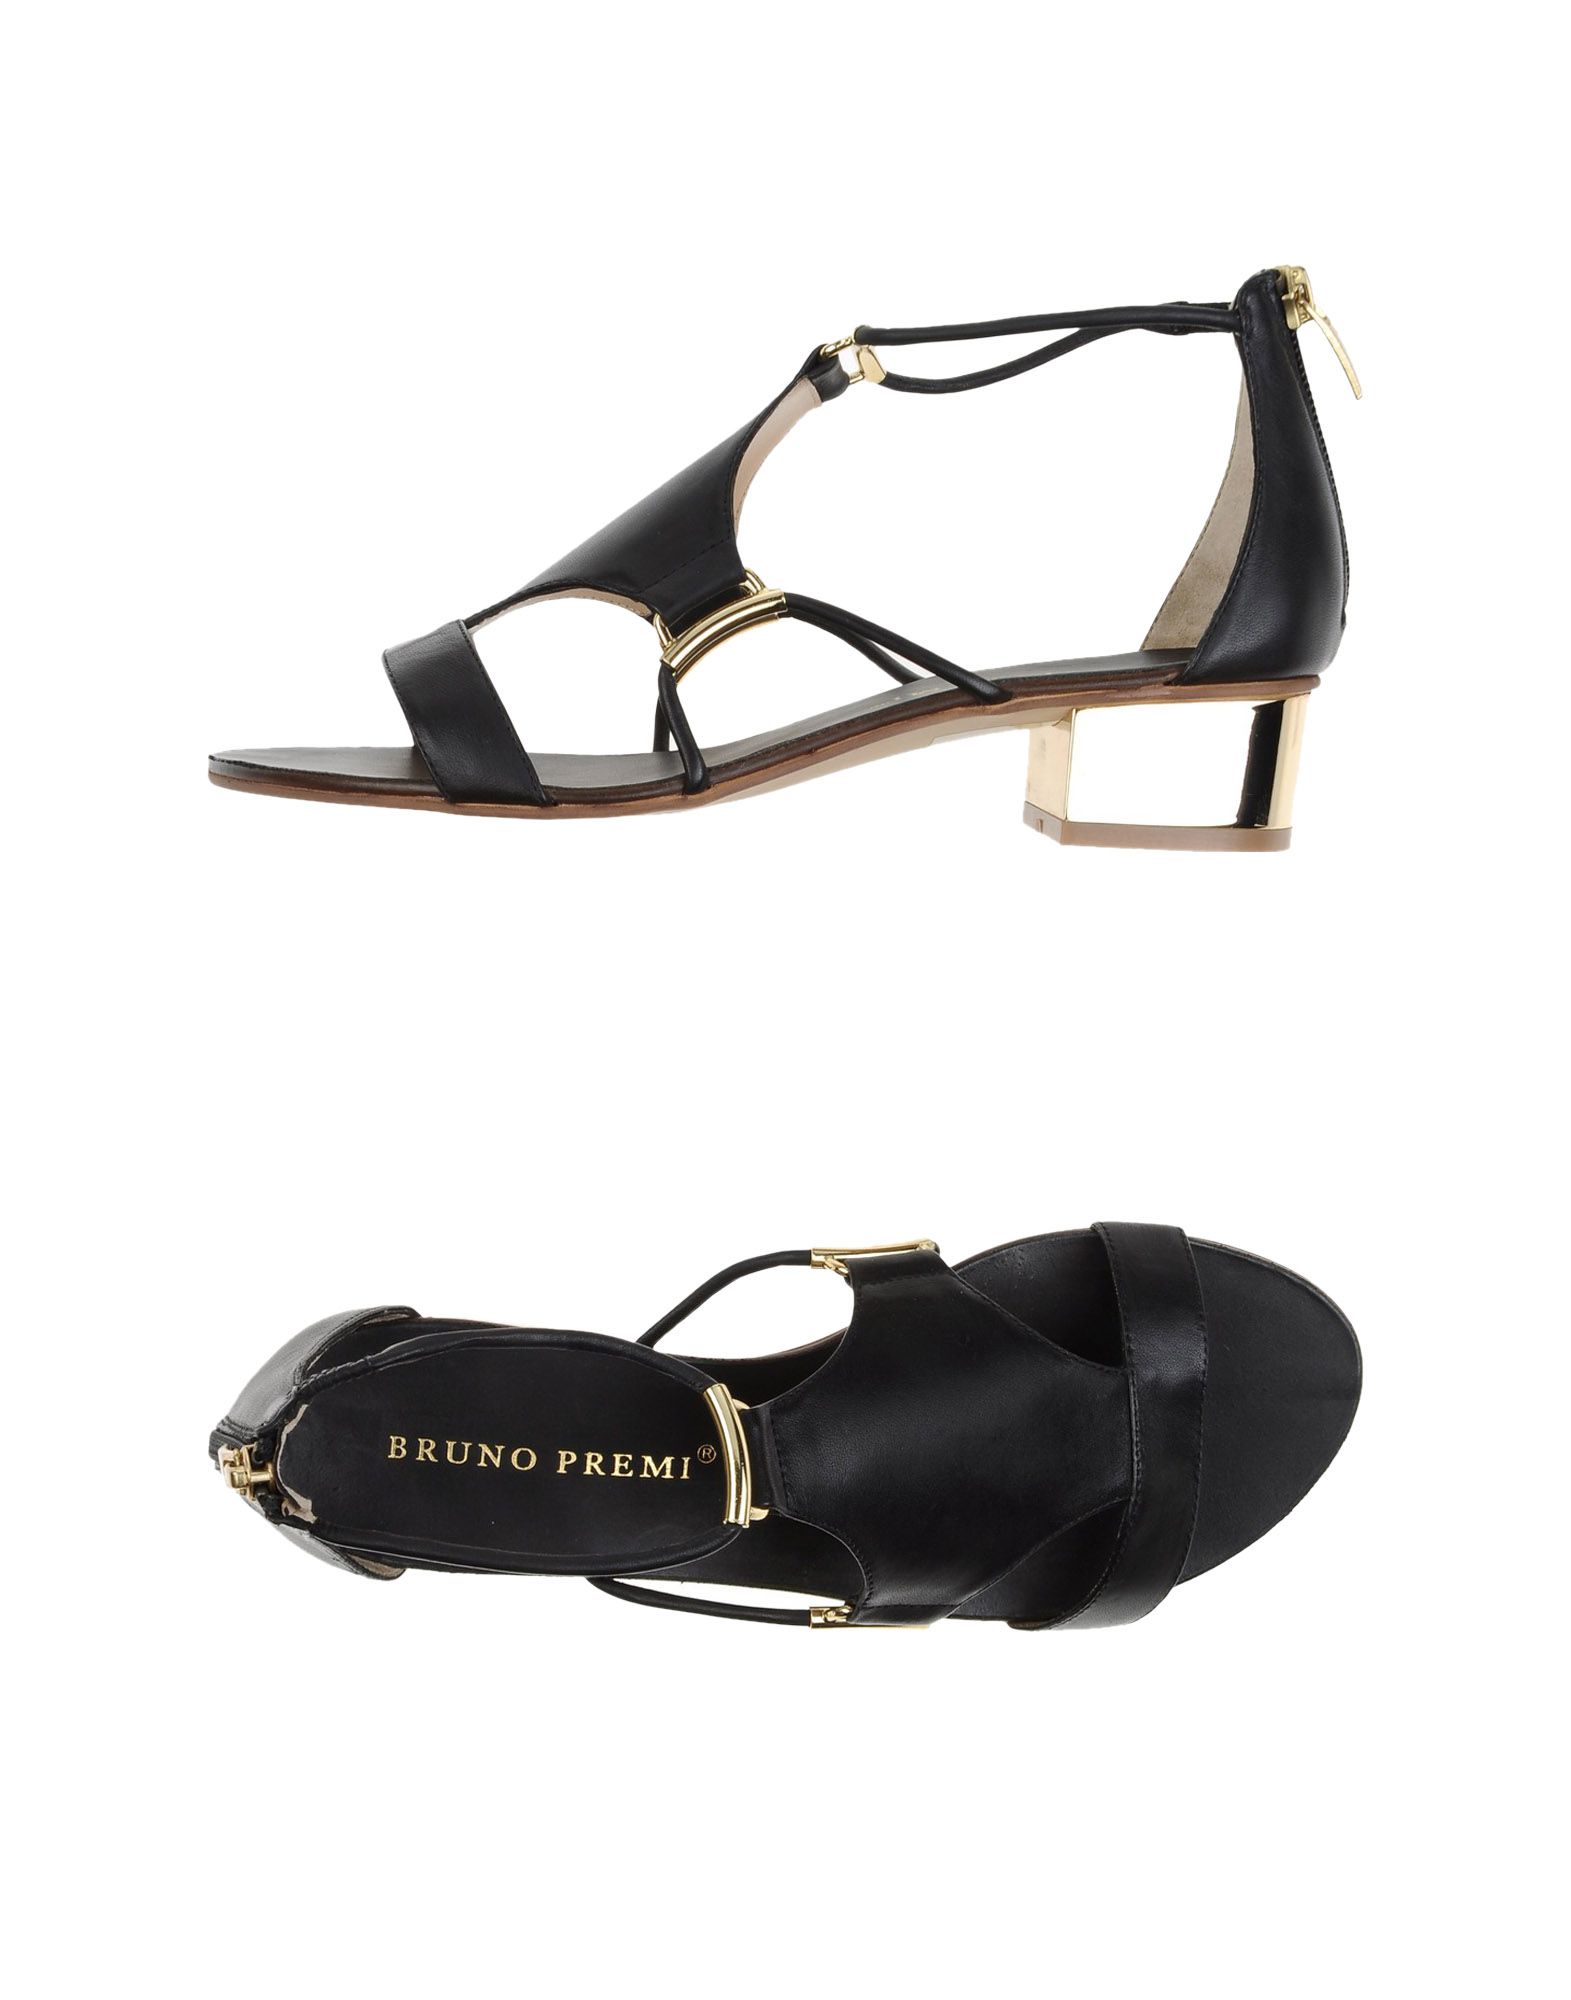 Mid-heel sandals | Style Point of View Blog